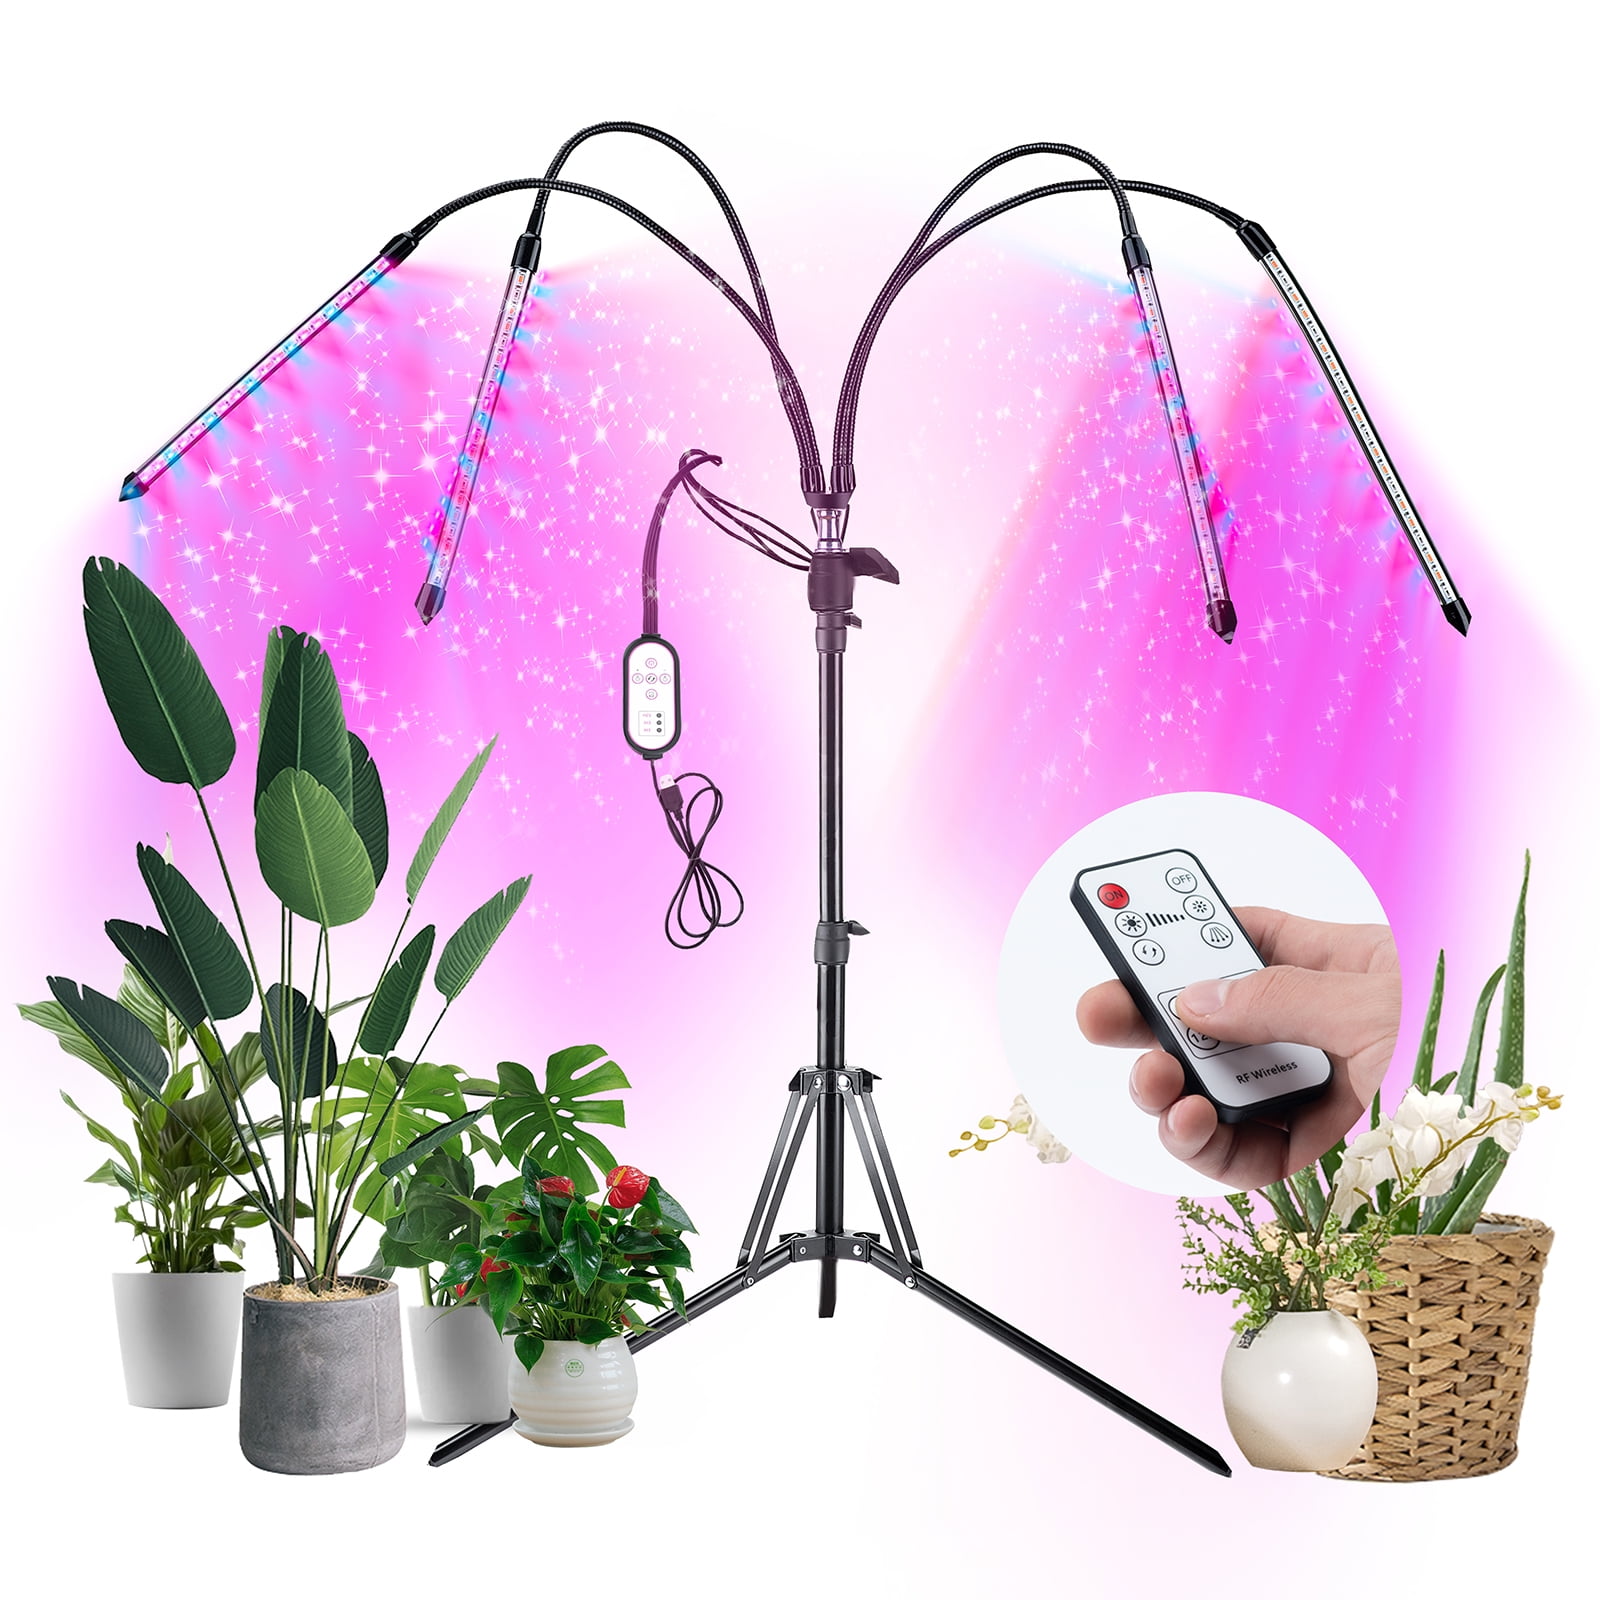 Four Heads LED Grow Lamp Clip-on Desk USB Indoor Plant Flower Growing Light YI 